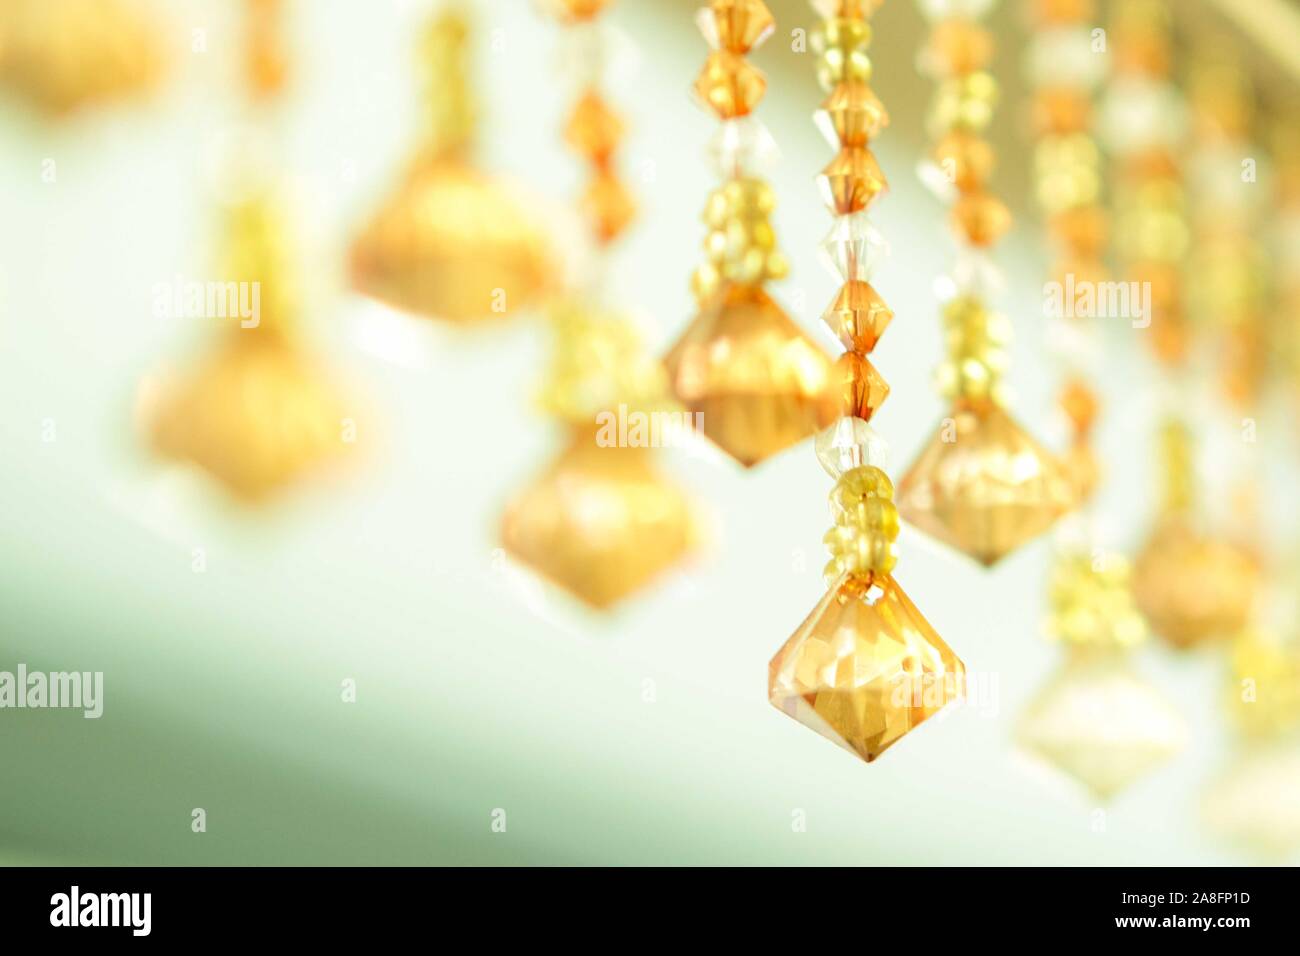 Chrystal golden yellow elements close-up. Selective focuse. Stock Photo